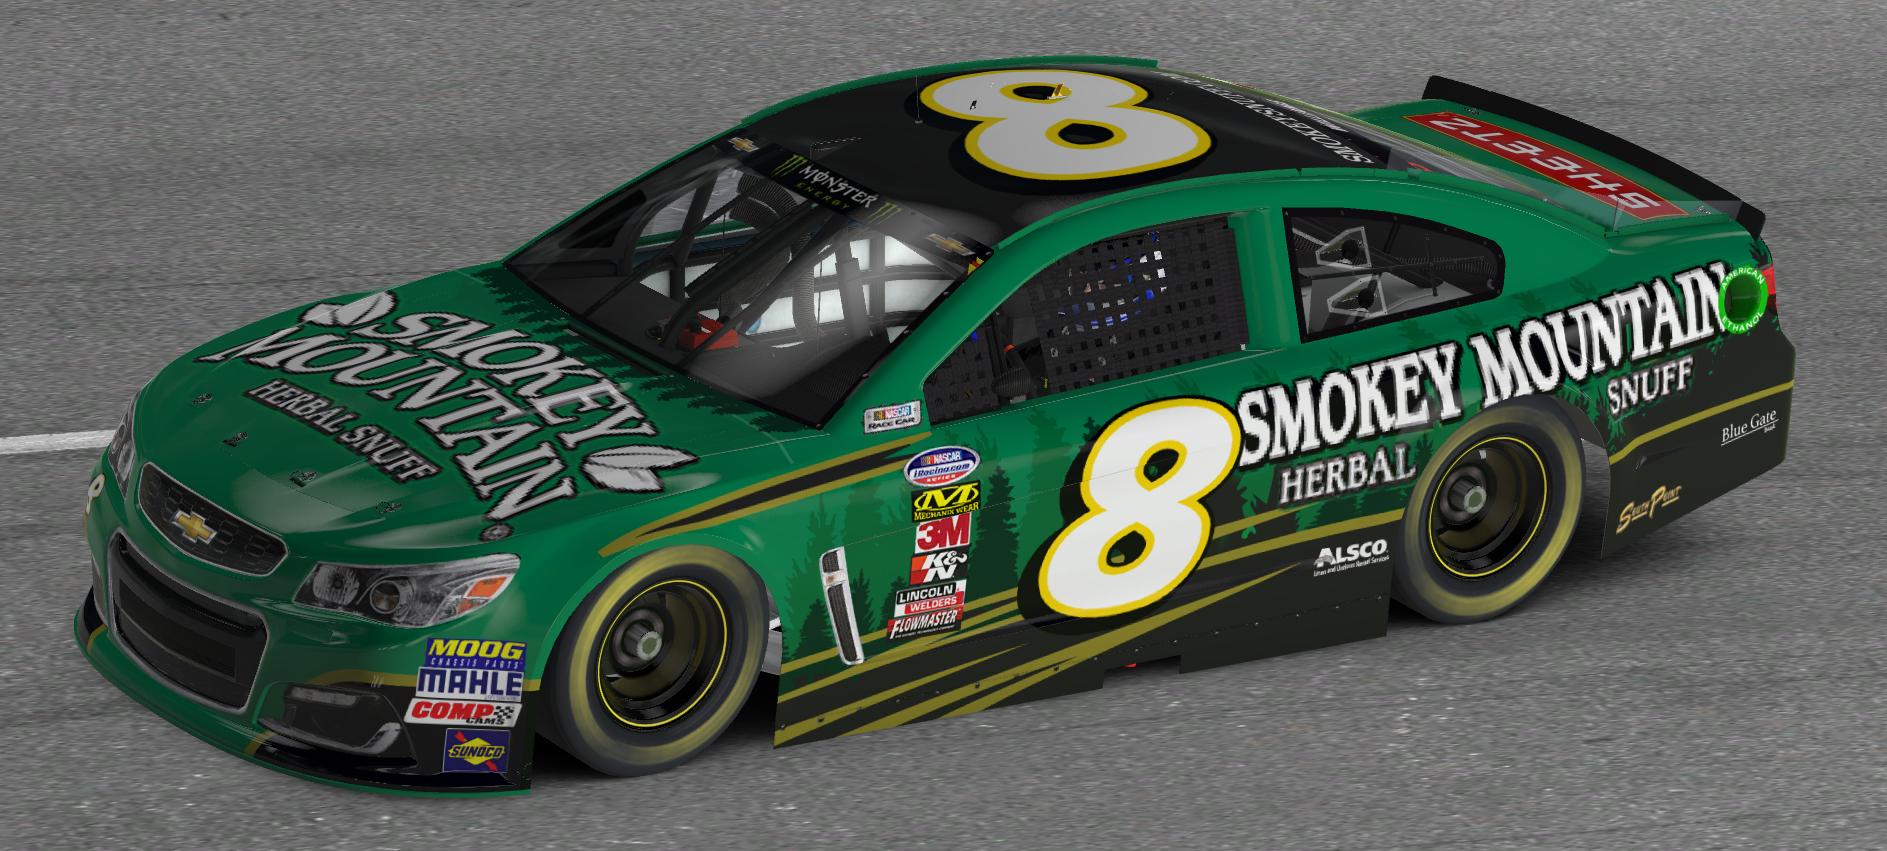 Preview of Daniel Hemric 2018 debut Chevy by Justin M. Williams